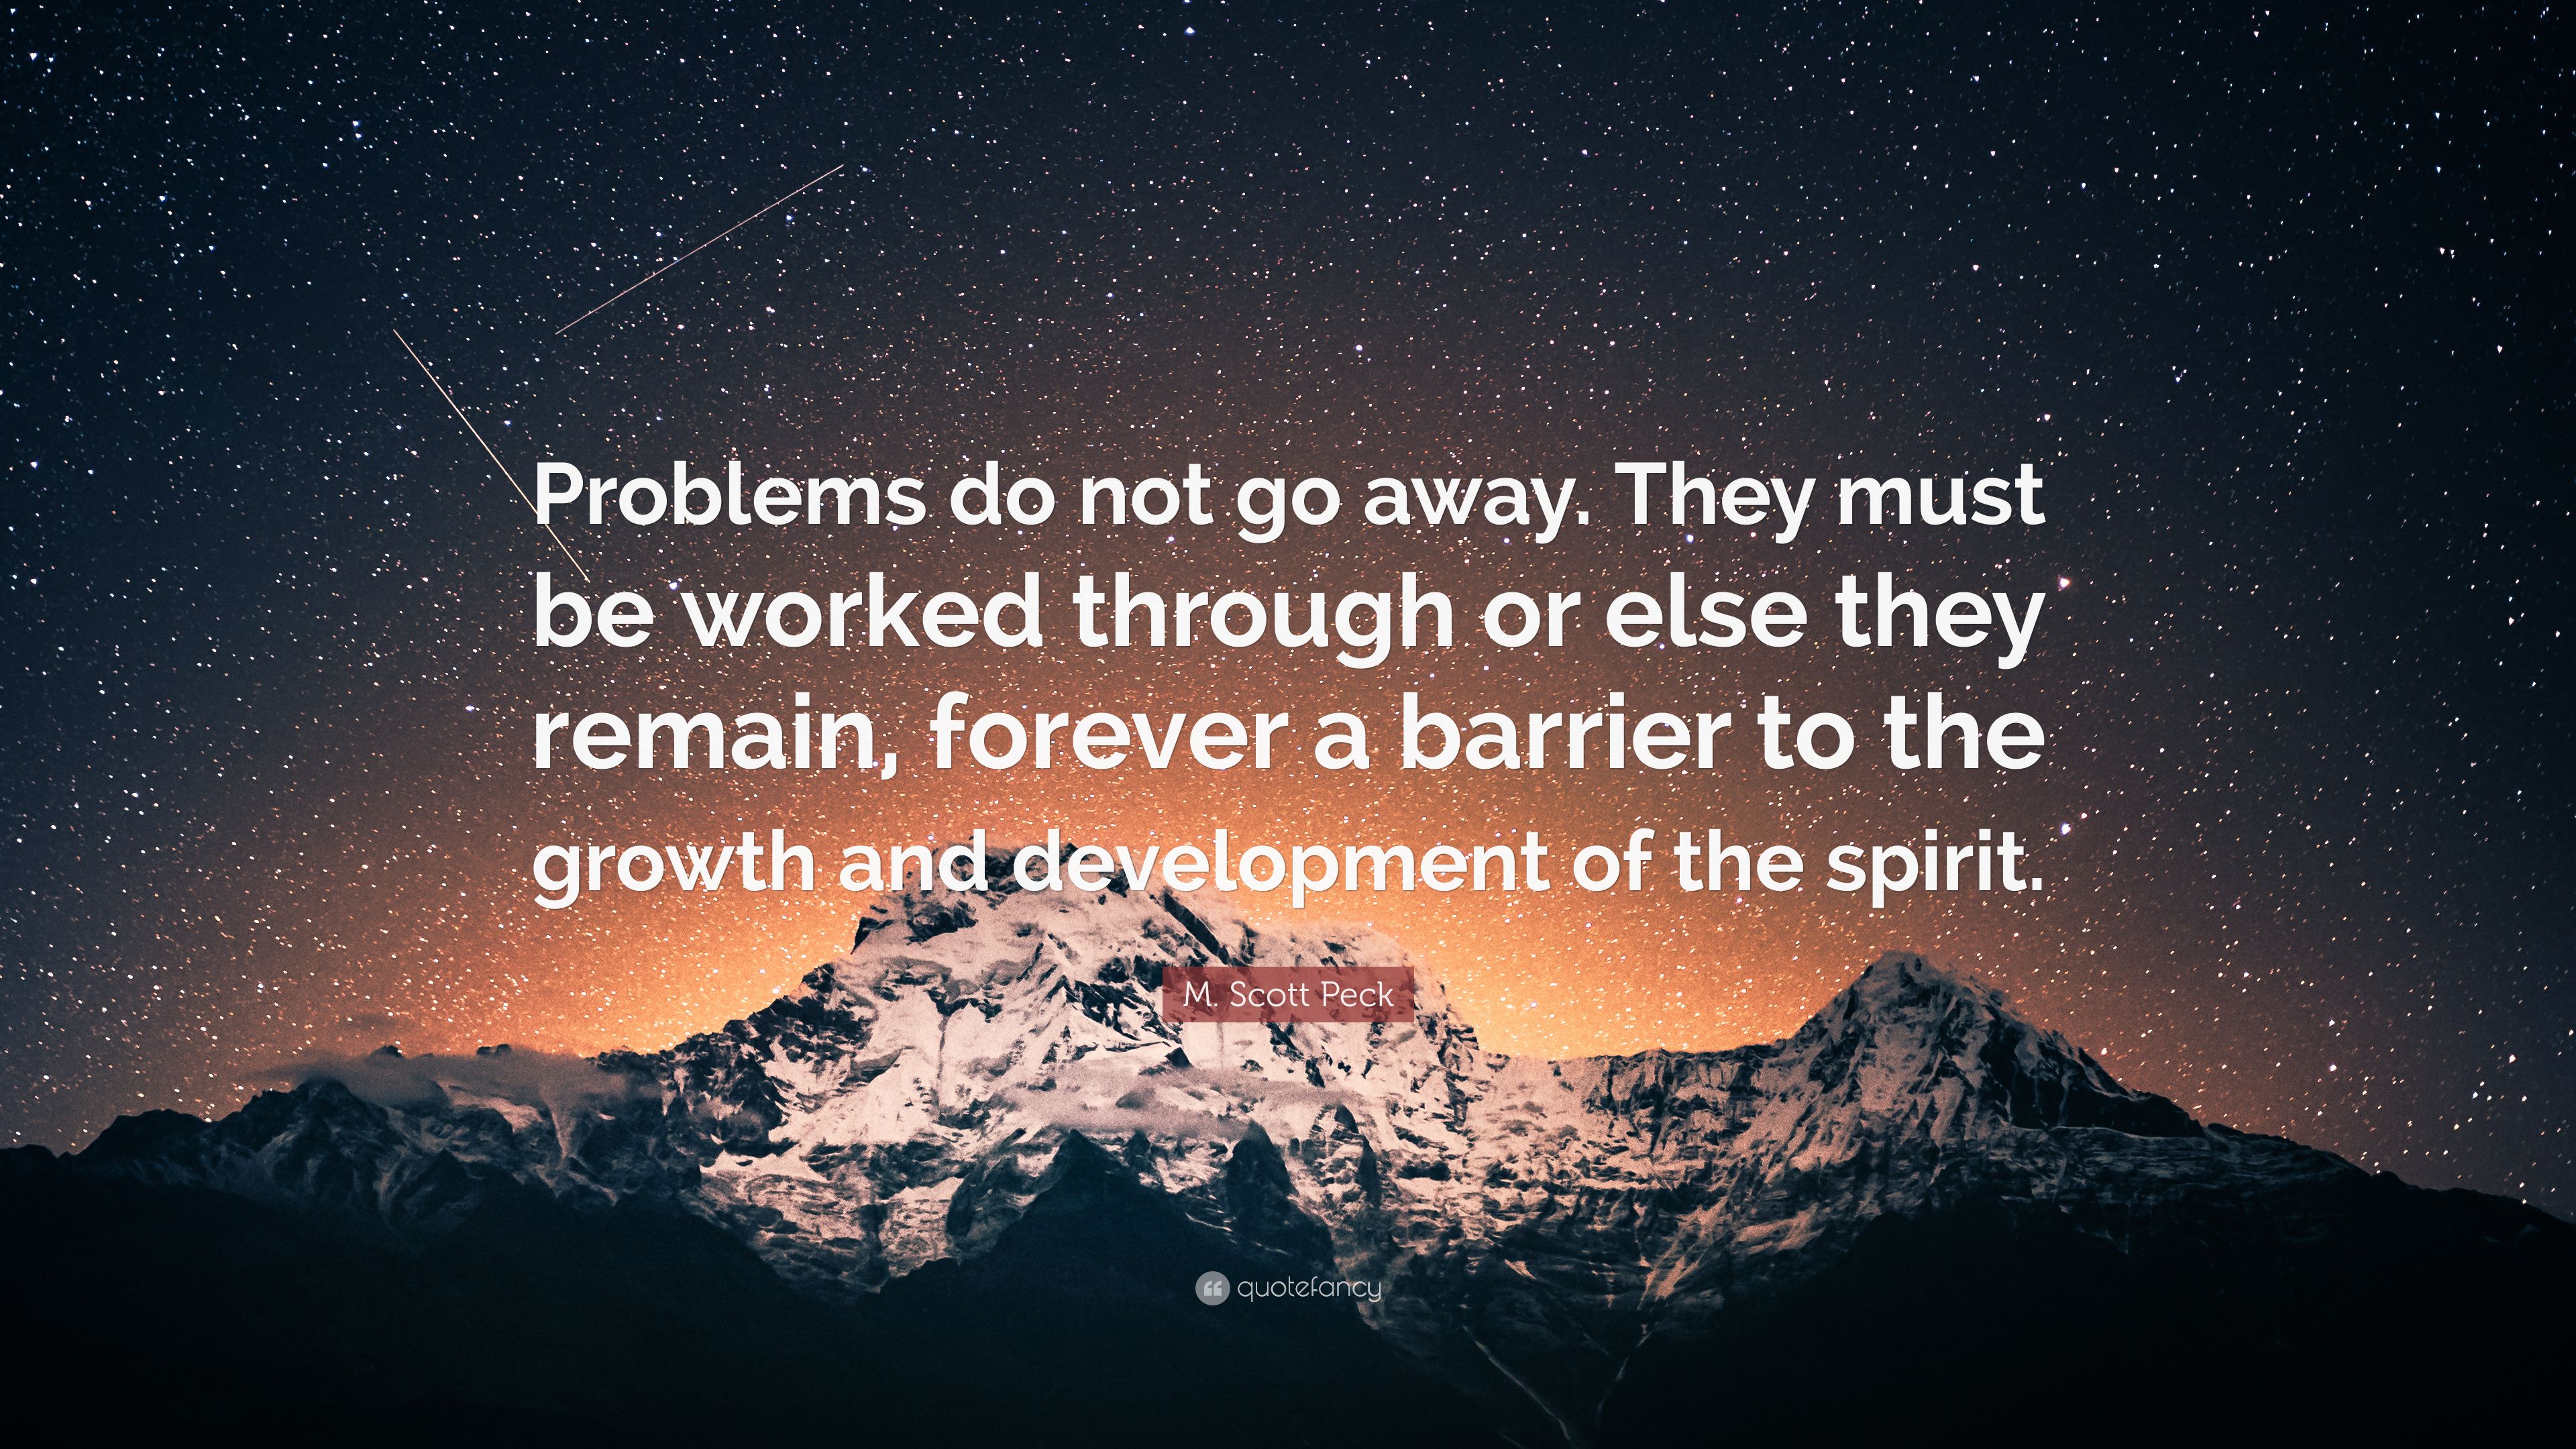 M. Scott Peck Quote: “Problems do not go away. They must be worked